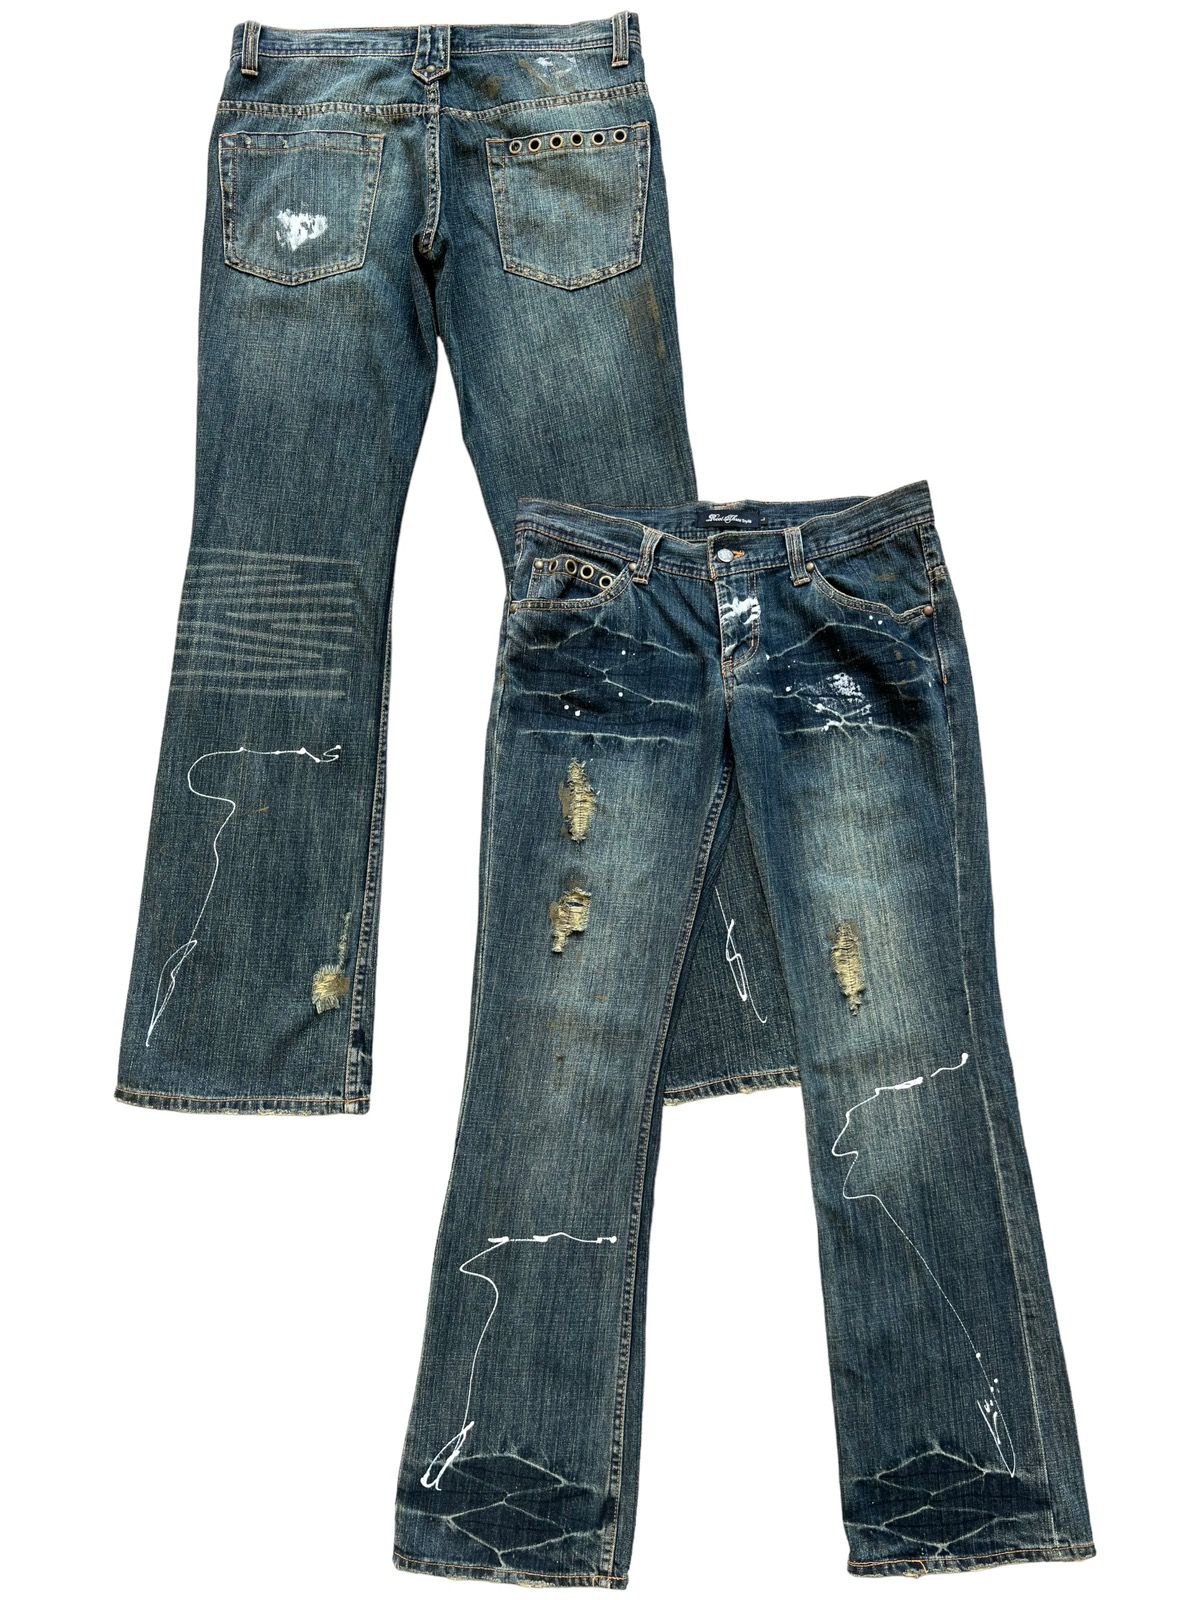 Hype - Roots Japan Distressed Riped Rusty Denim Painted Jeans 33x33 - 1